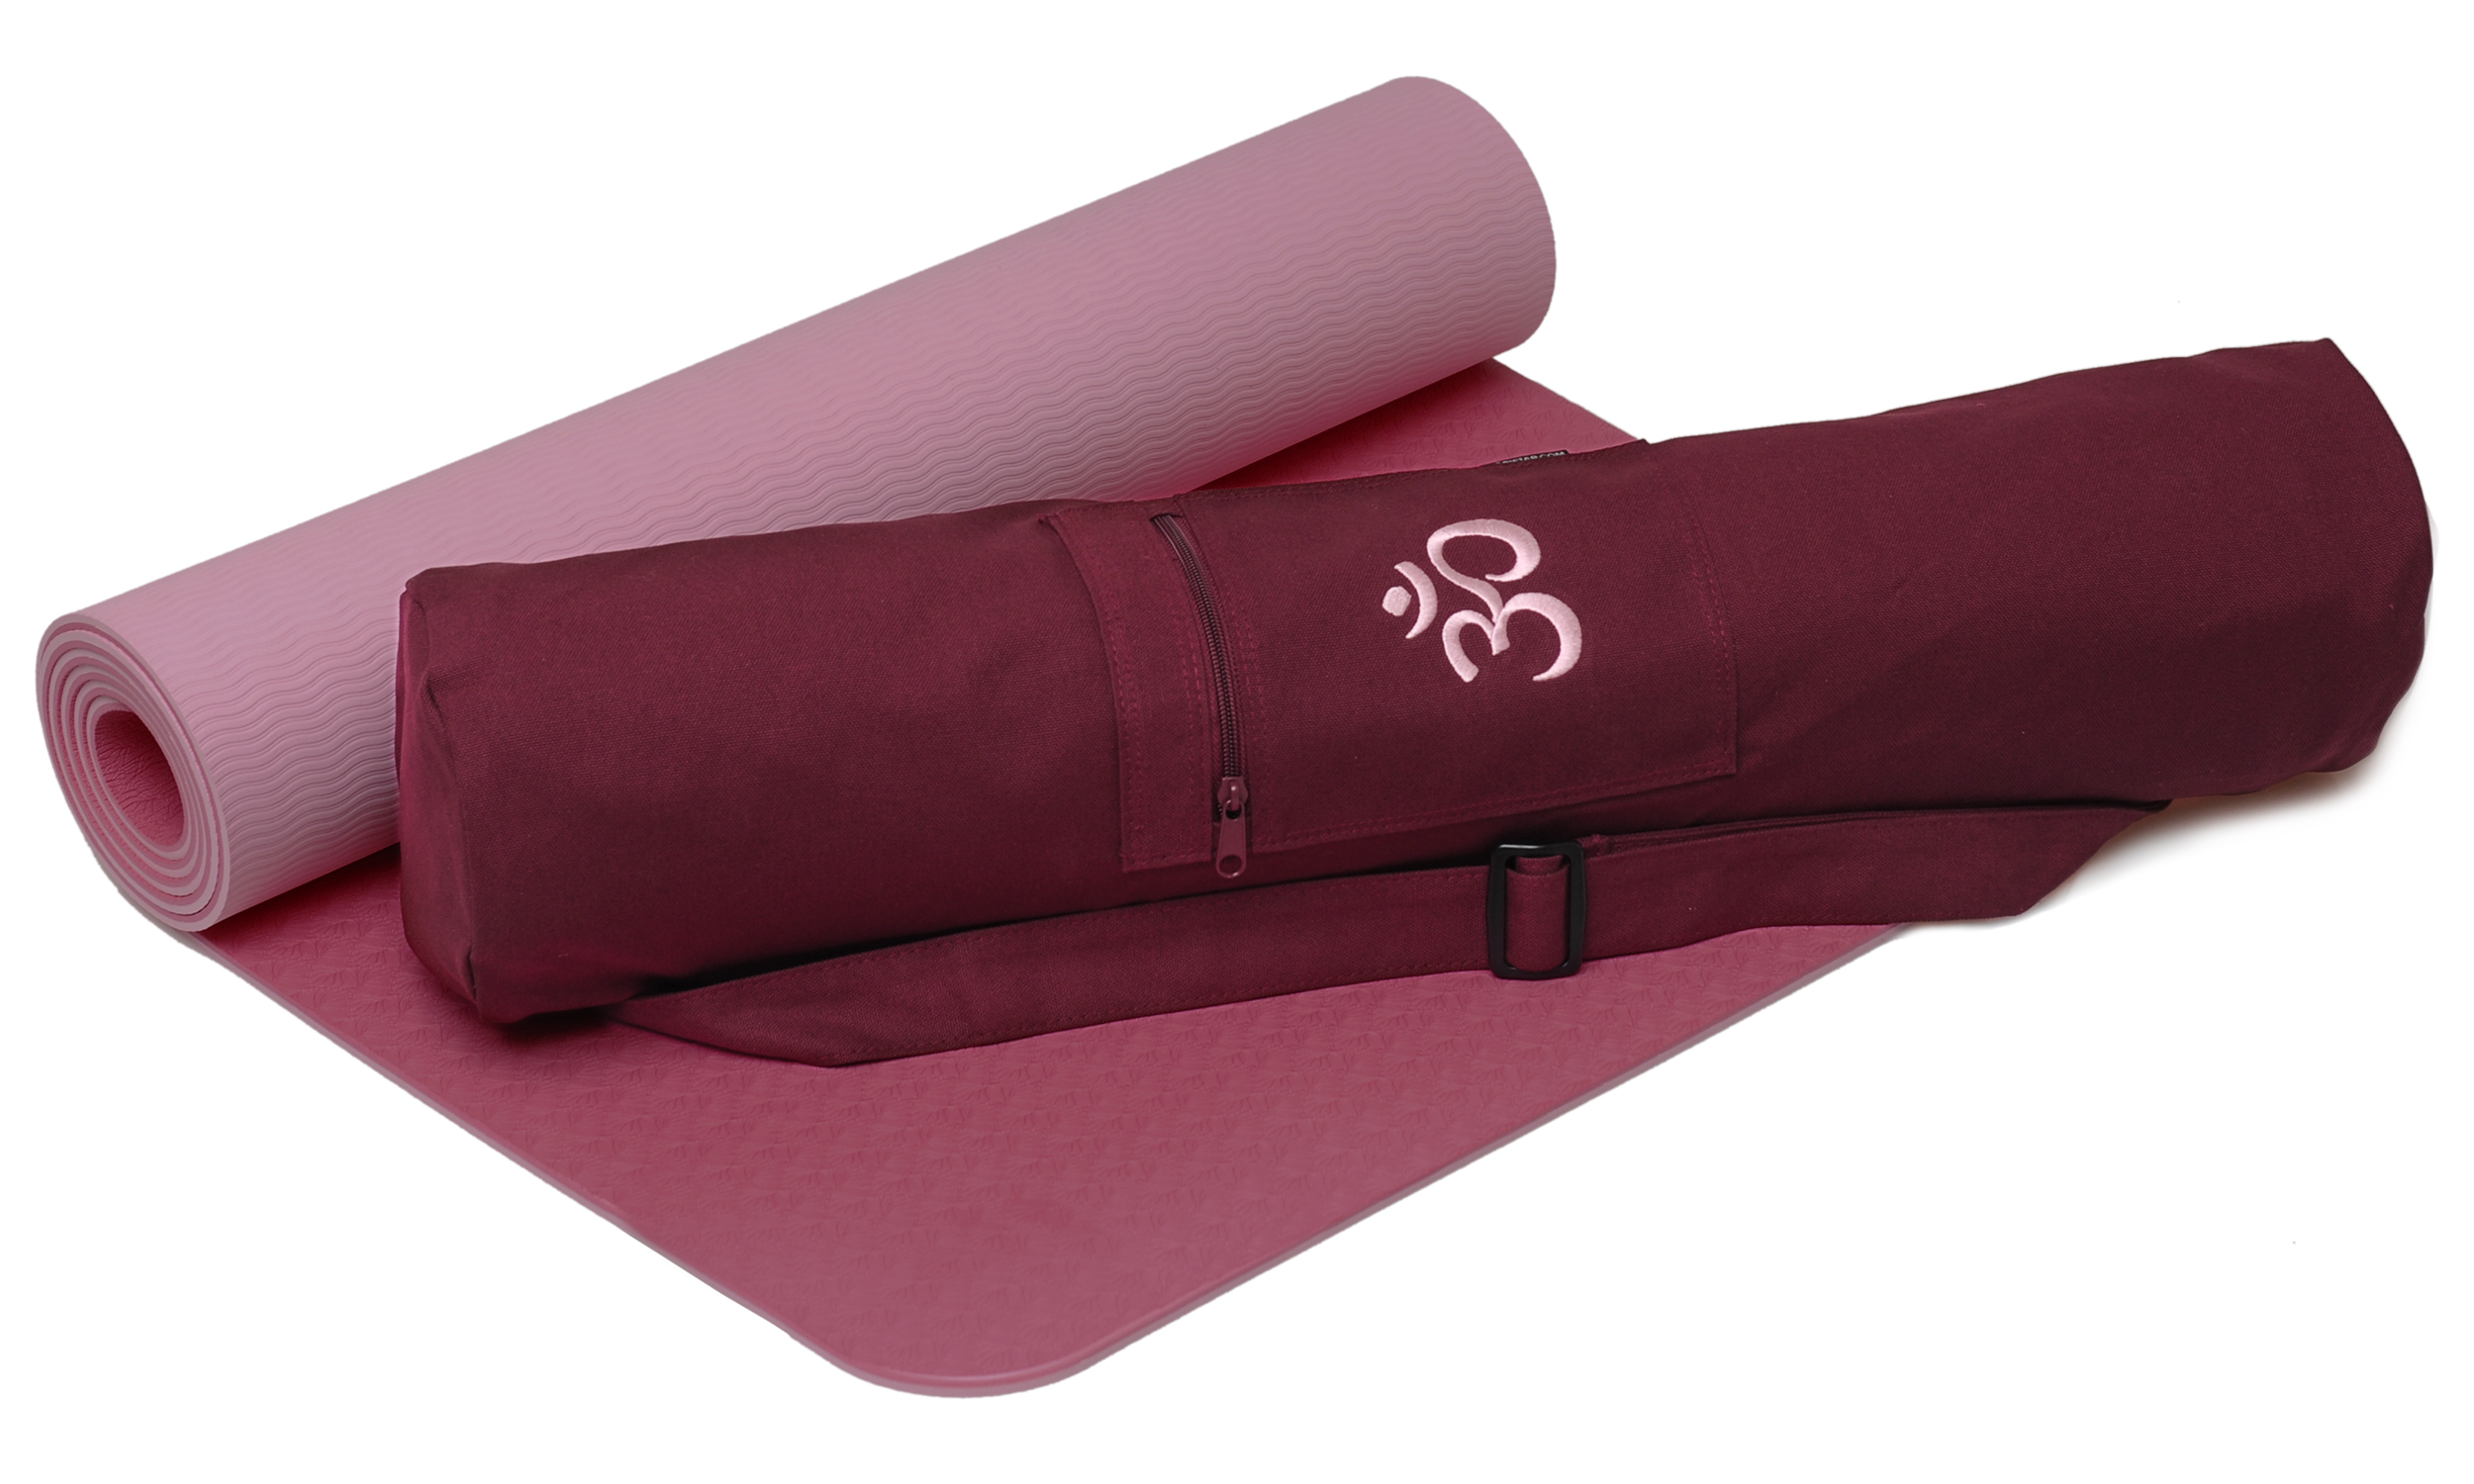 https://www.yogistar.com/out/pictures/master/product/1/yogaset_starter_edition_comfort_bordeaux_web2500(2).jpg